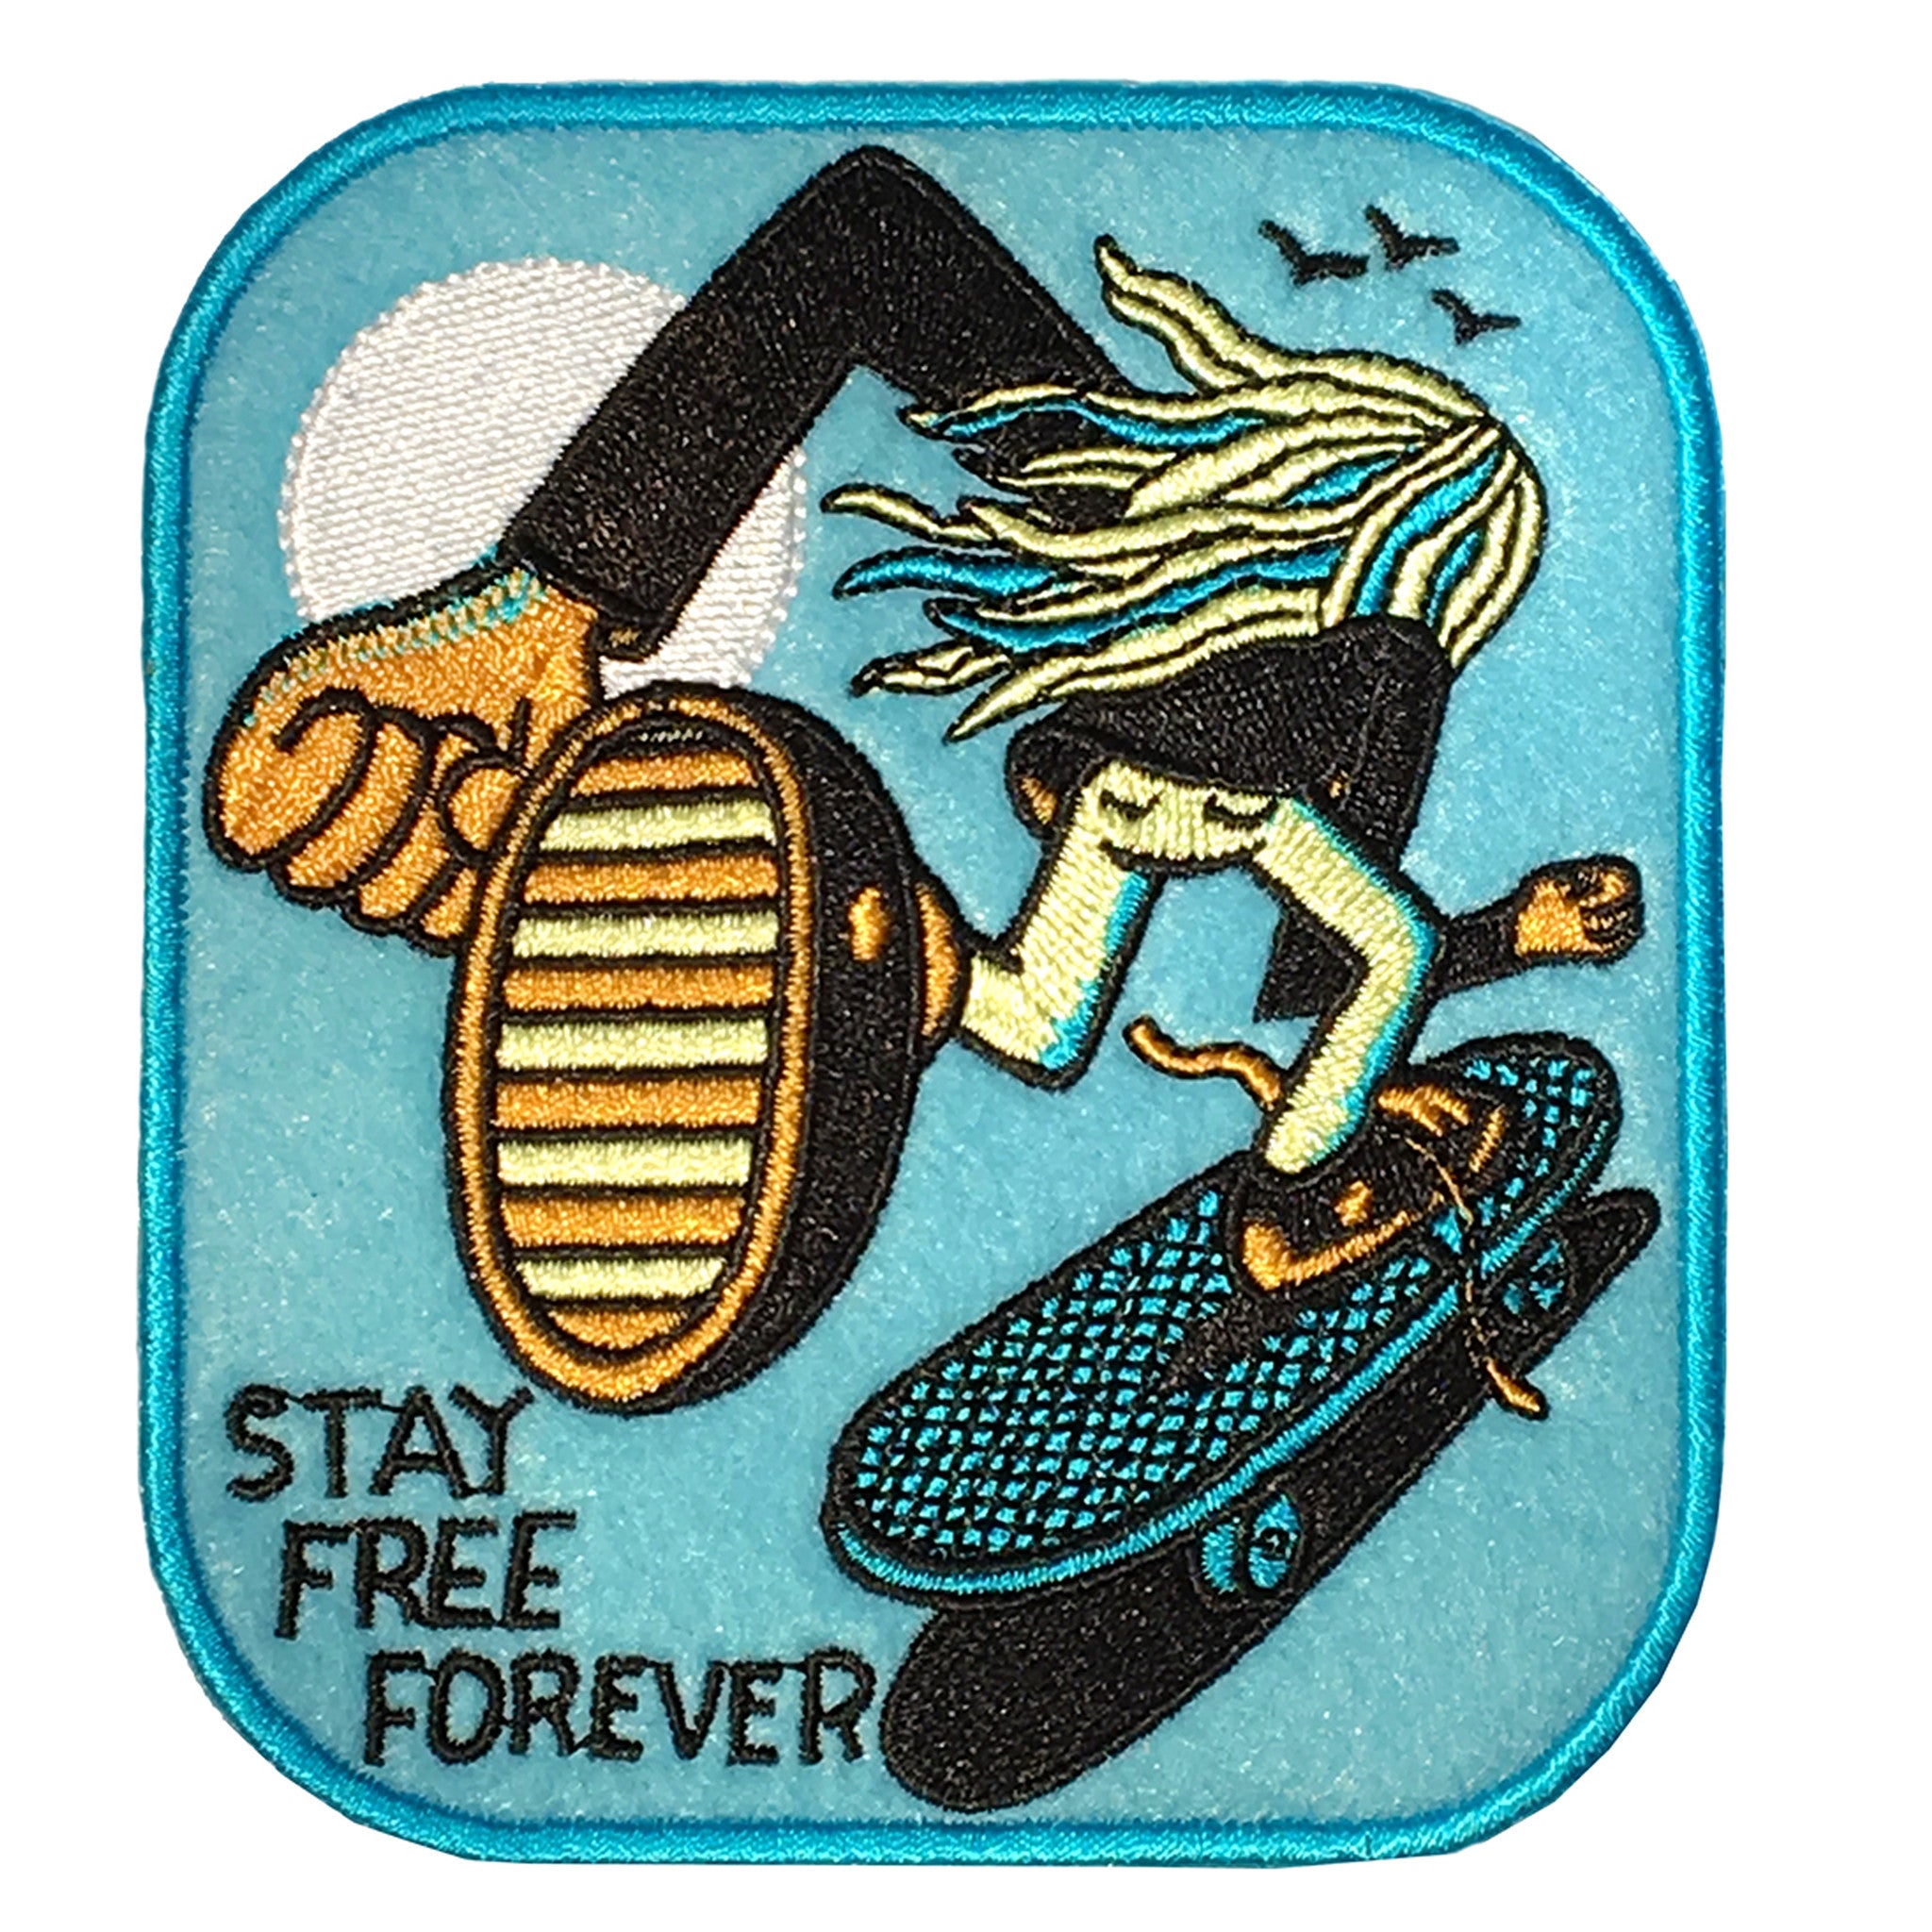 Stay Free Forever Patch